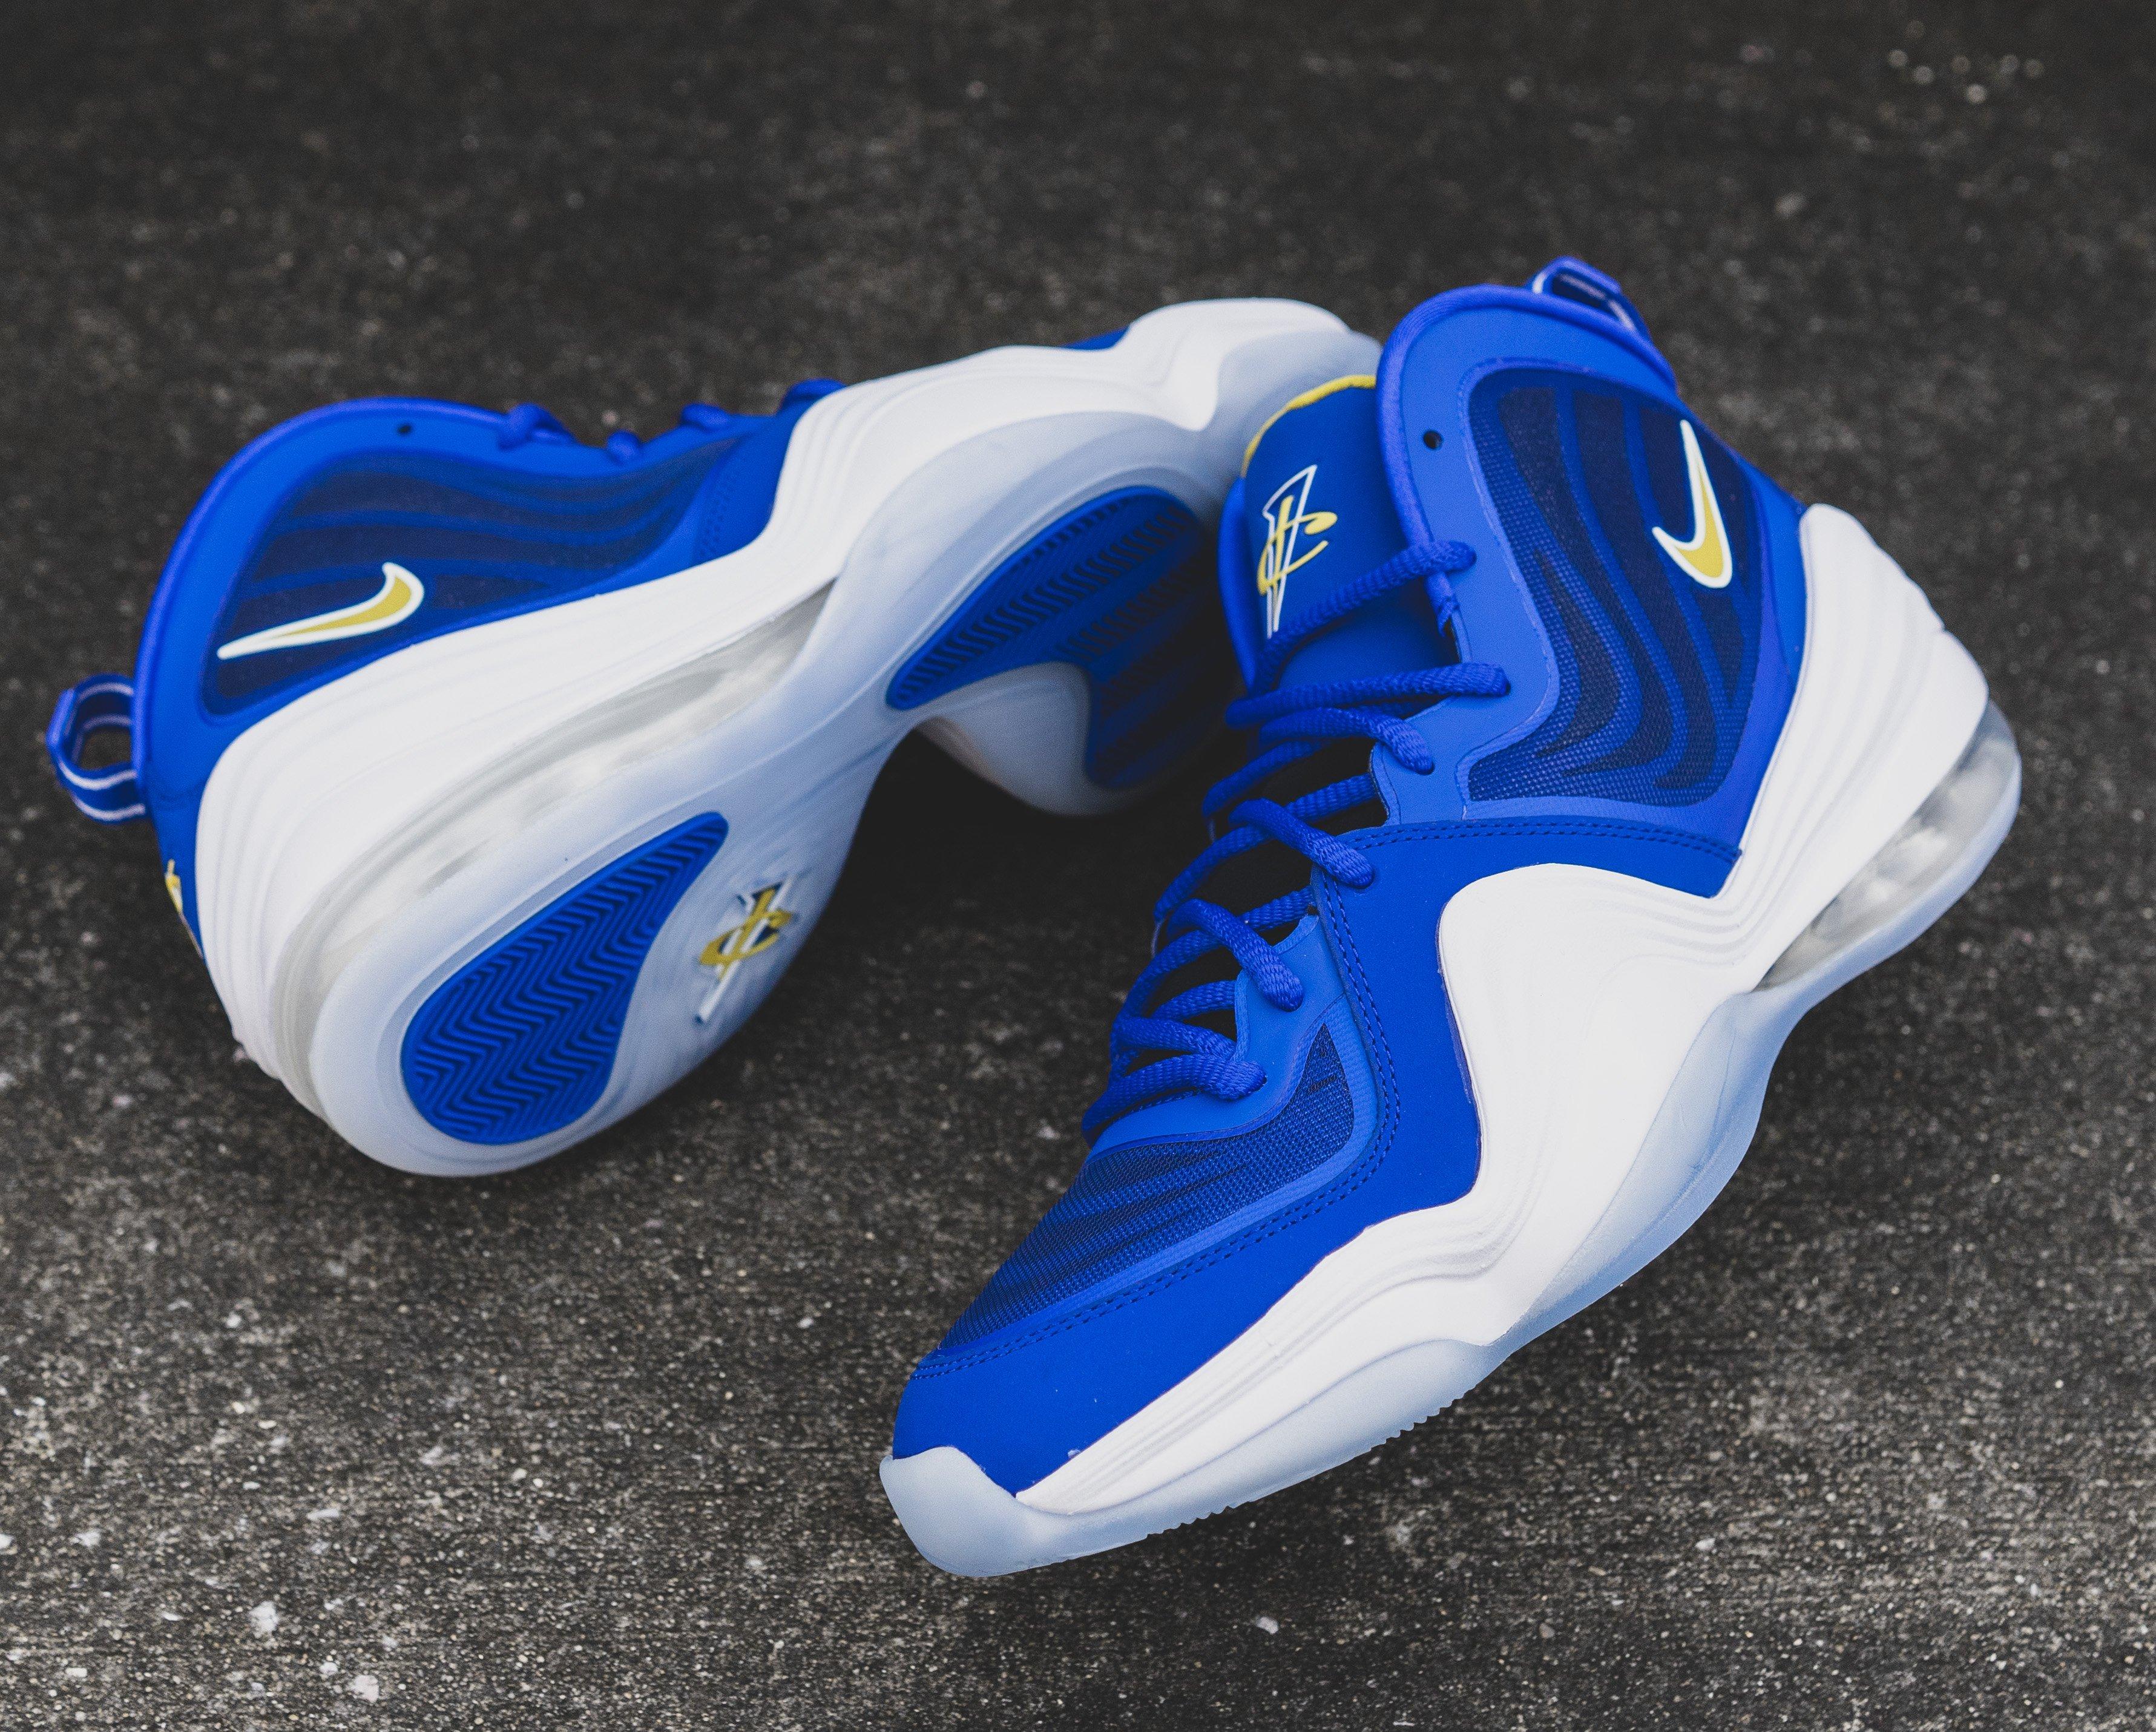 Sneakers Release &#8211; Nike Air Penny V &#8220;Blue Chips&#8221; Bright Blue/Yellow Streak Men&#8217;s Basketball